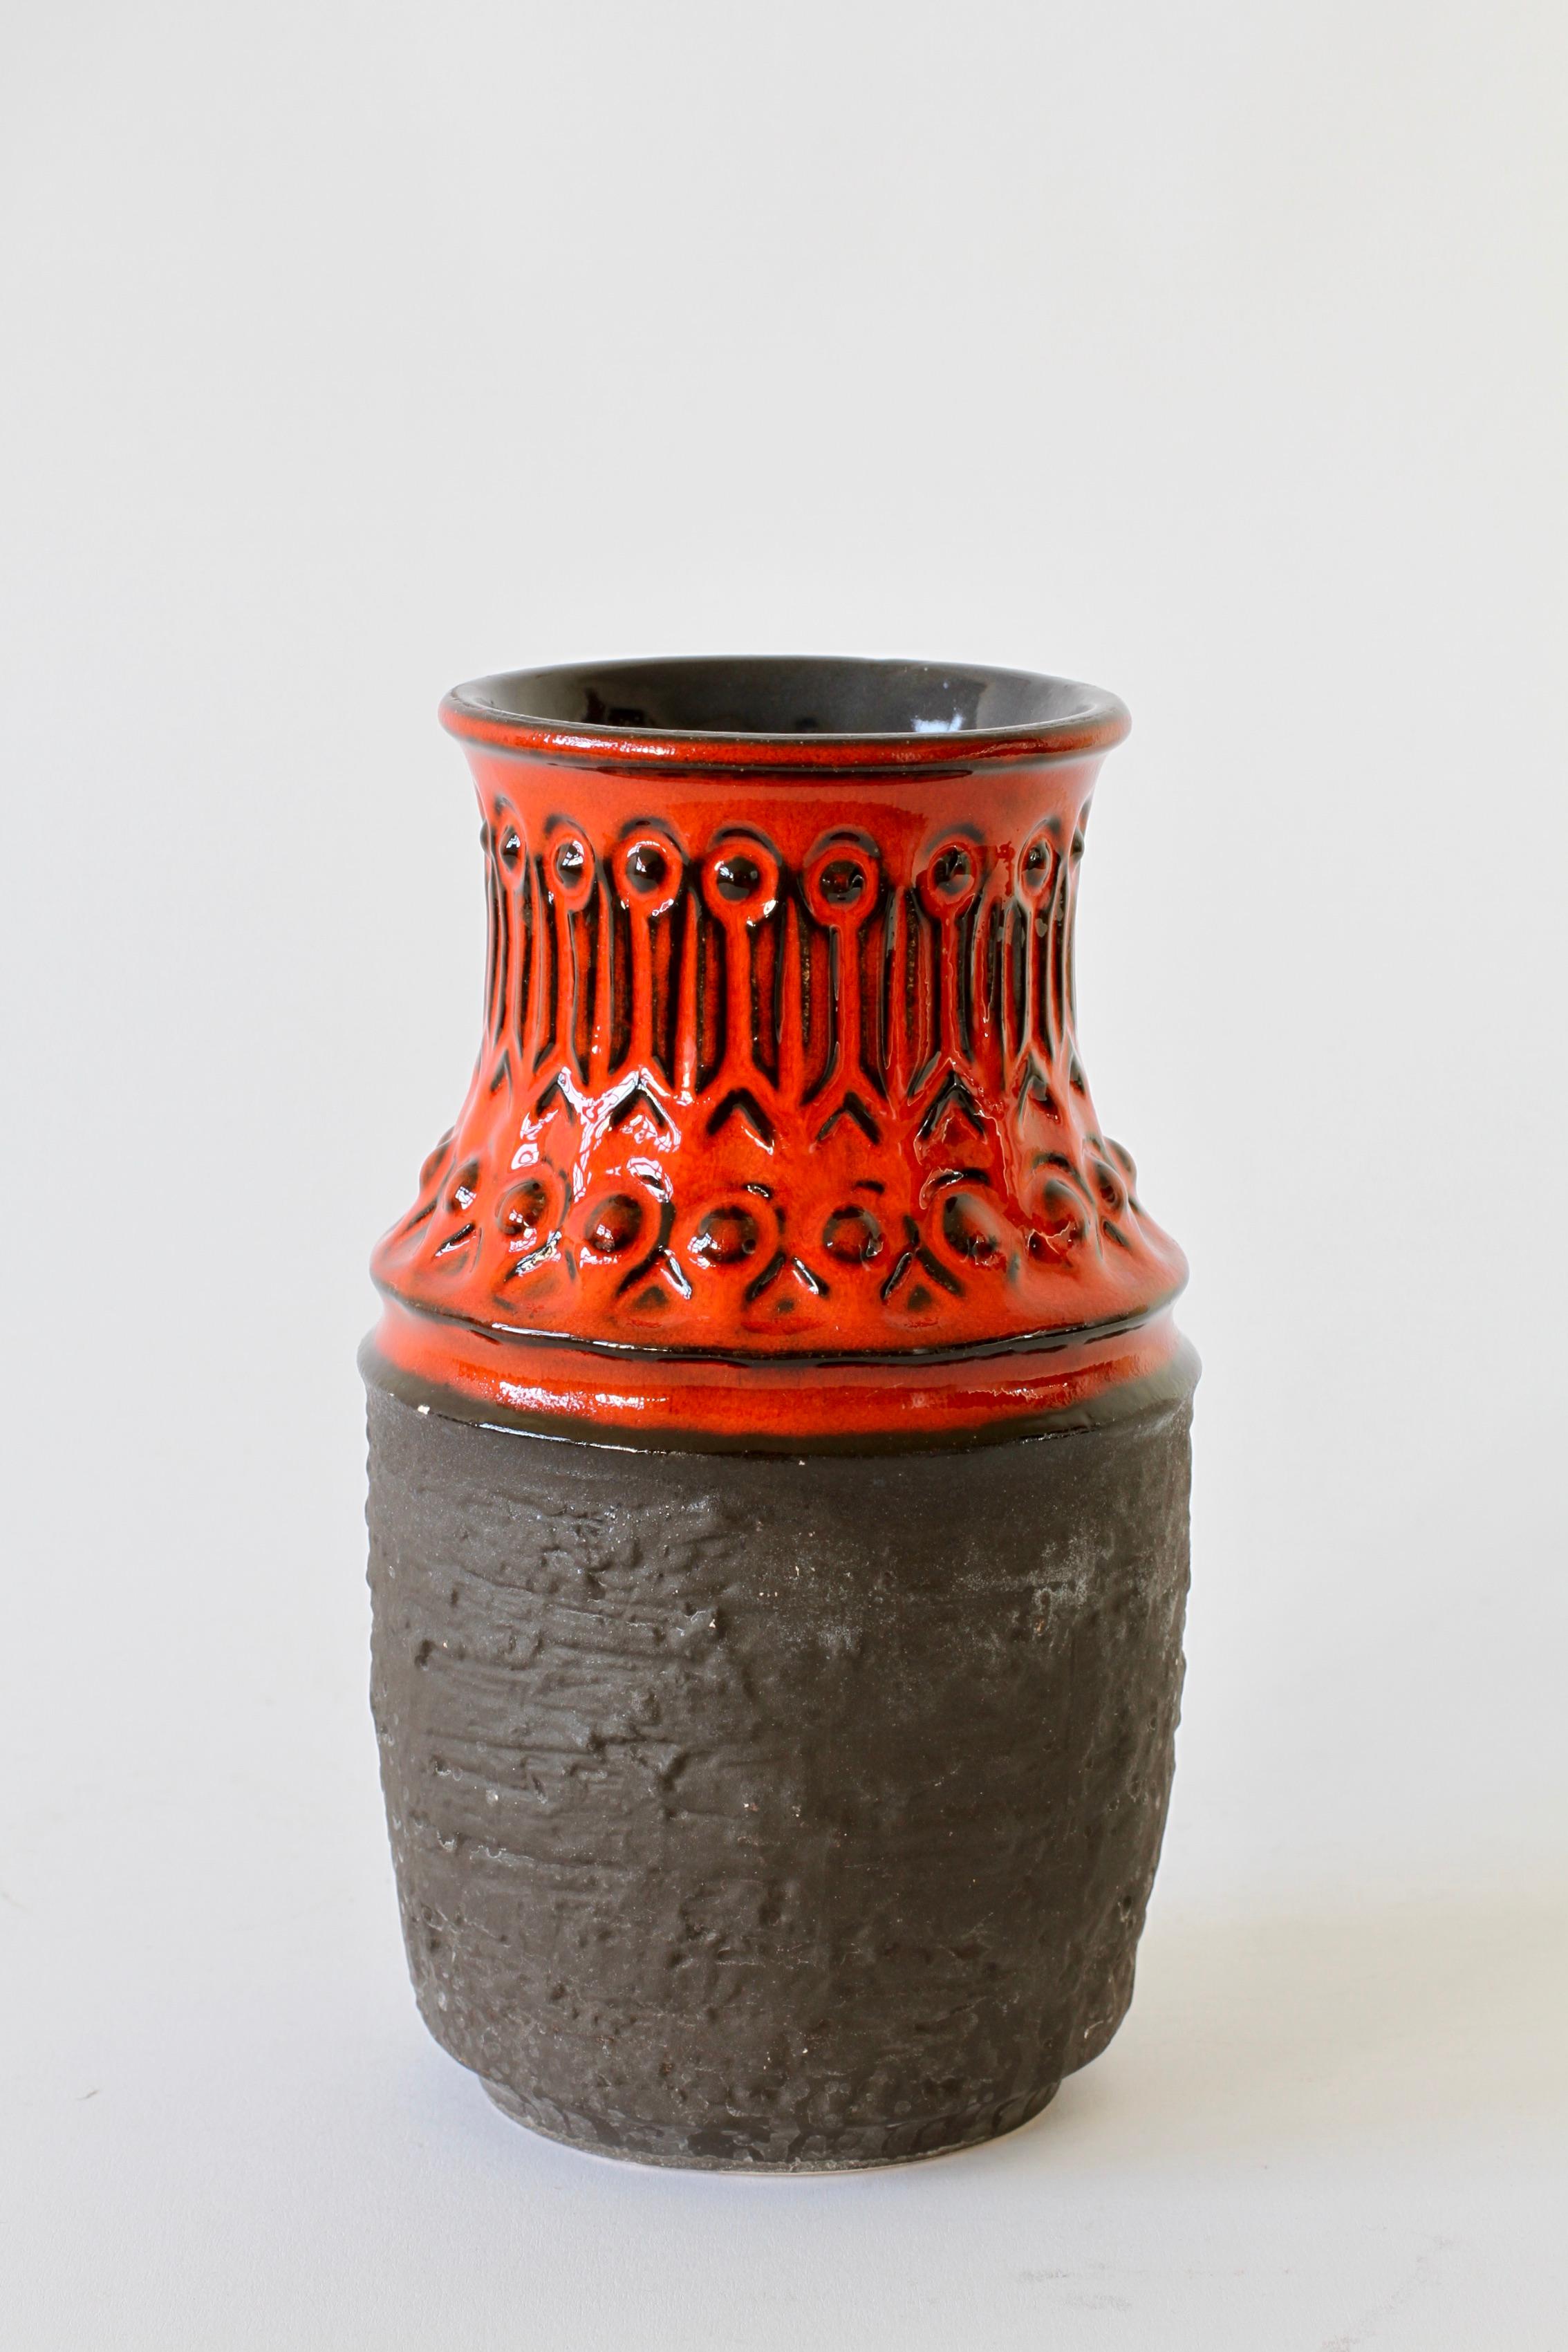 A beautiful vase in striking red and matte black with an embossed pattern - shape number 1 582 20 - produced by Jasba Pottery in the mid-1970s.

This vase makes a fantastic, striking statement when displayed on dark rosewood and teak tables or